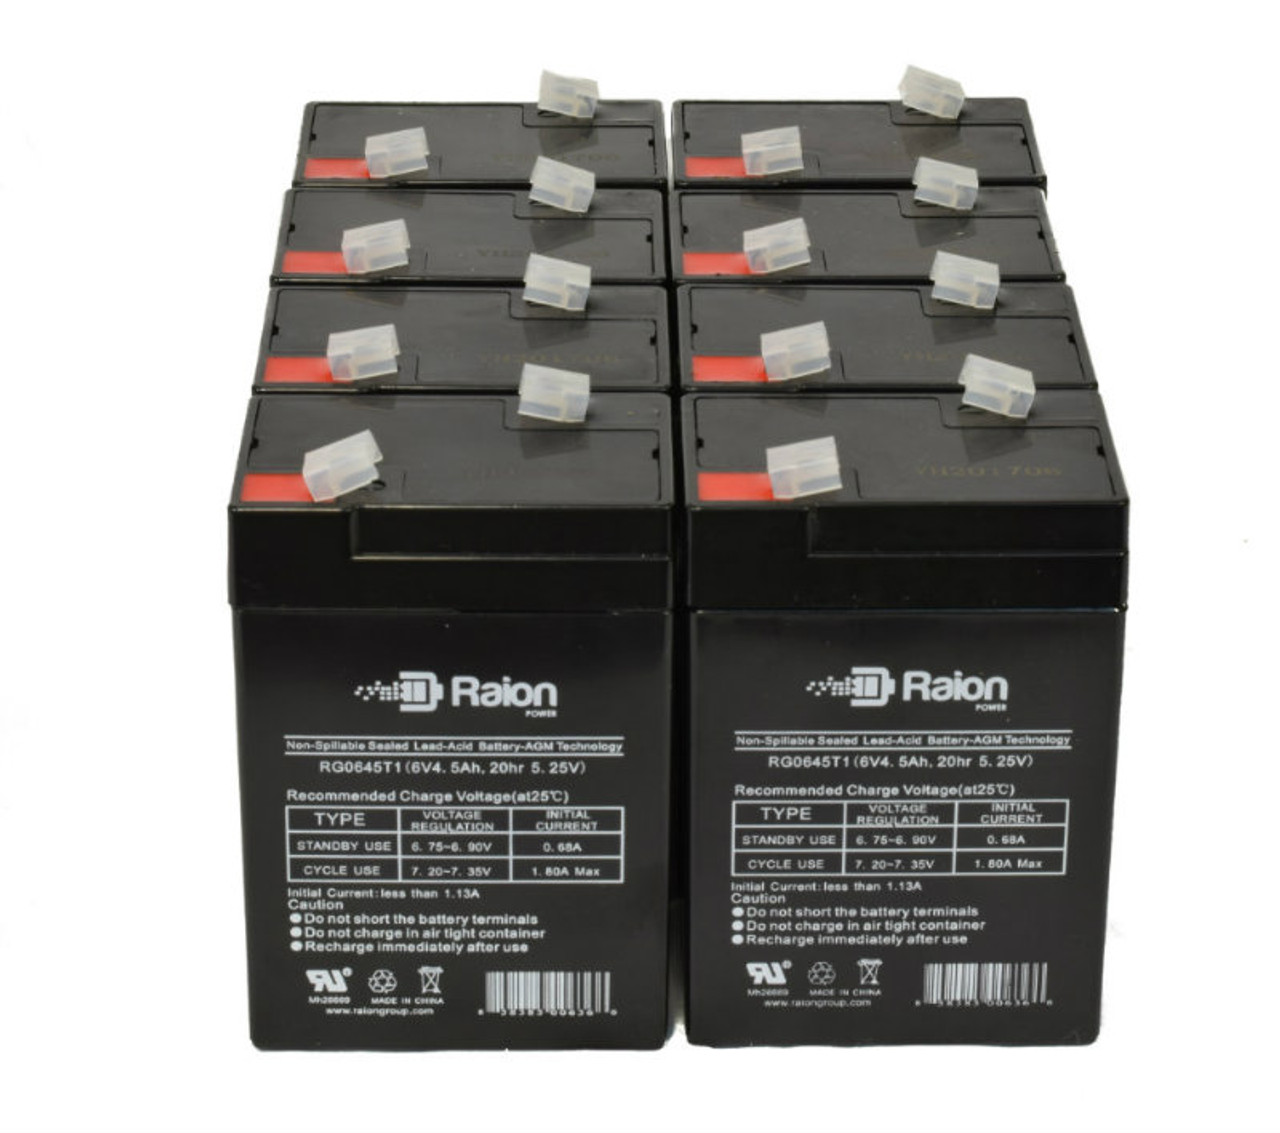 Raion Power 6V 4.5Ah Replacement Emergency Light Battery for Chloride CSU-6 - 8 Pack